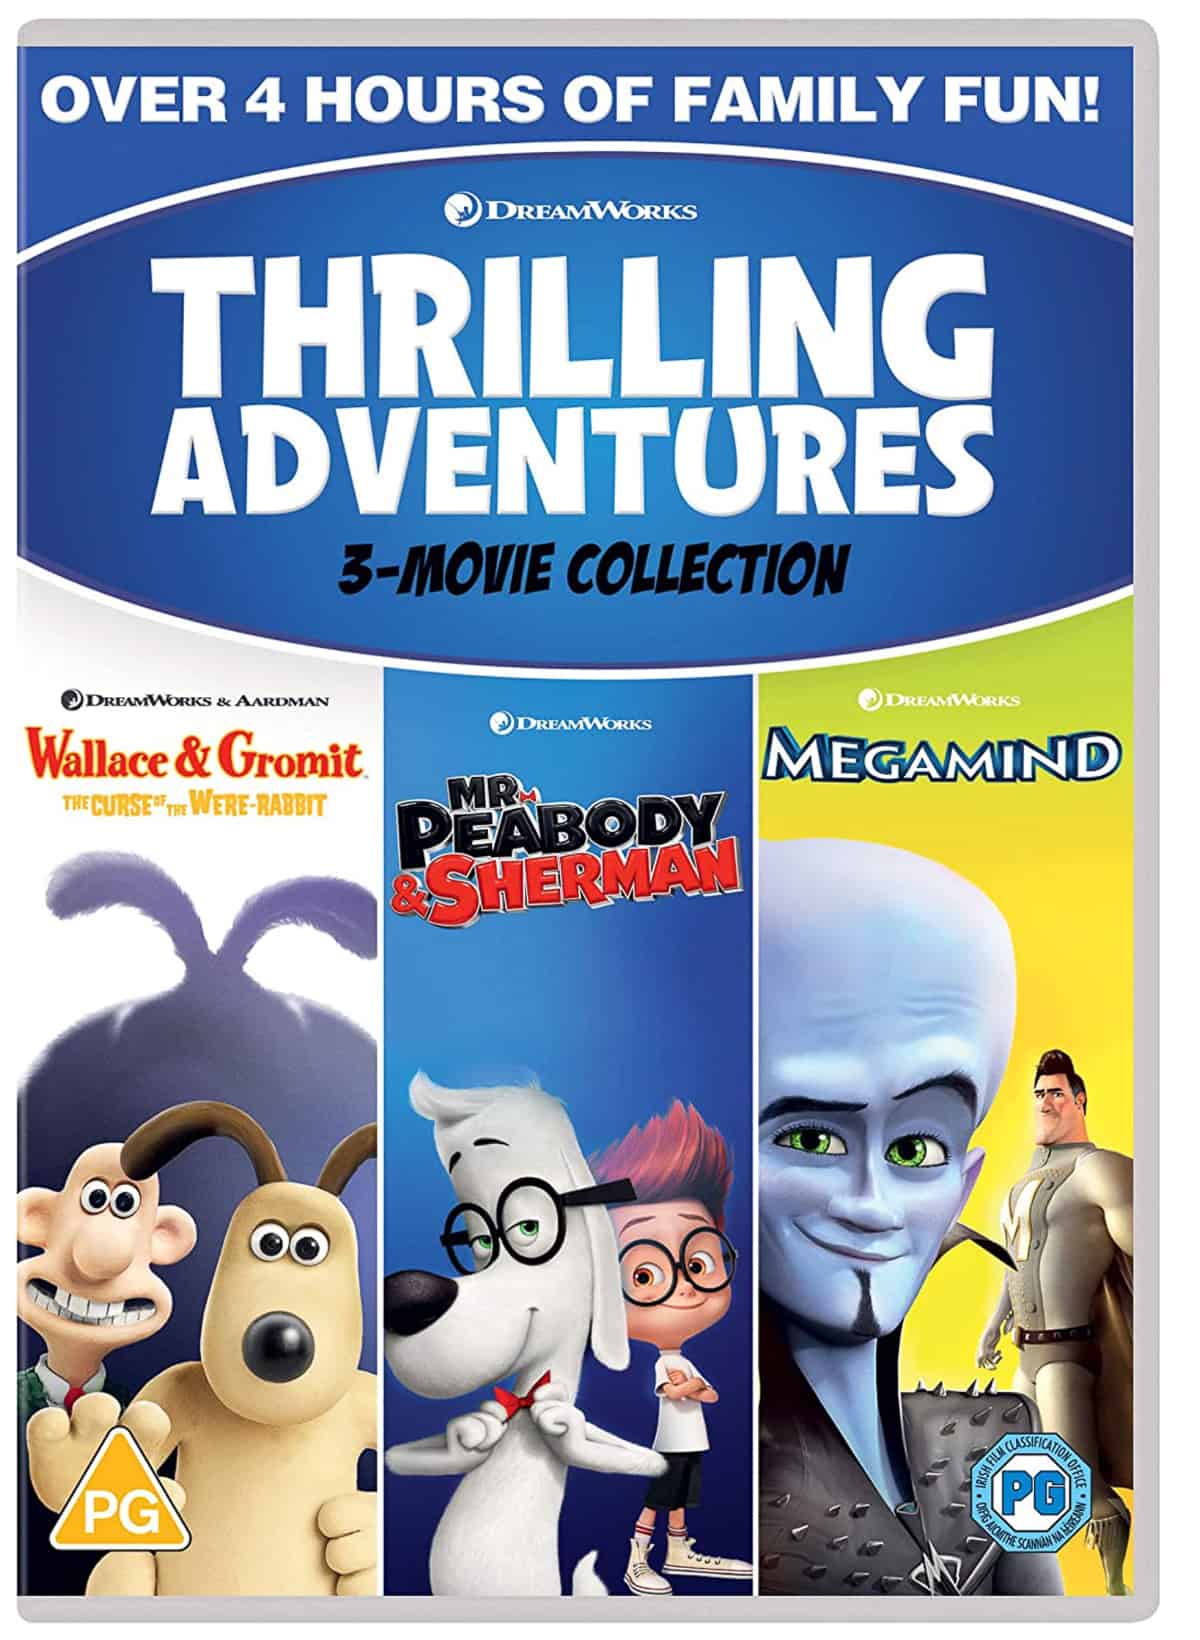 The Thrilling Adventures DVD Collection. 